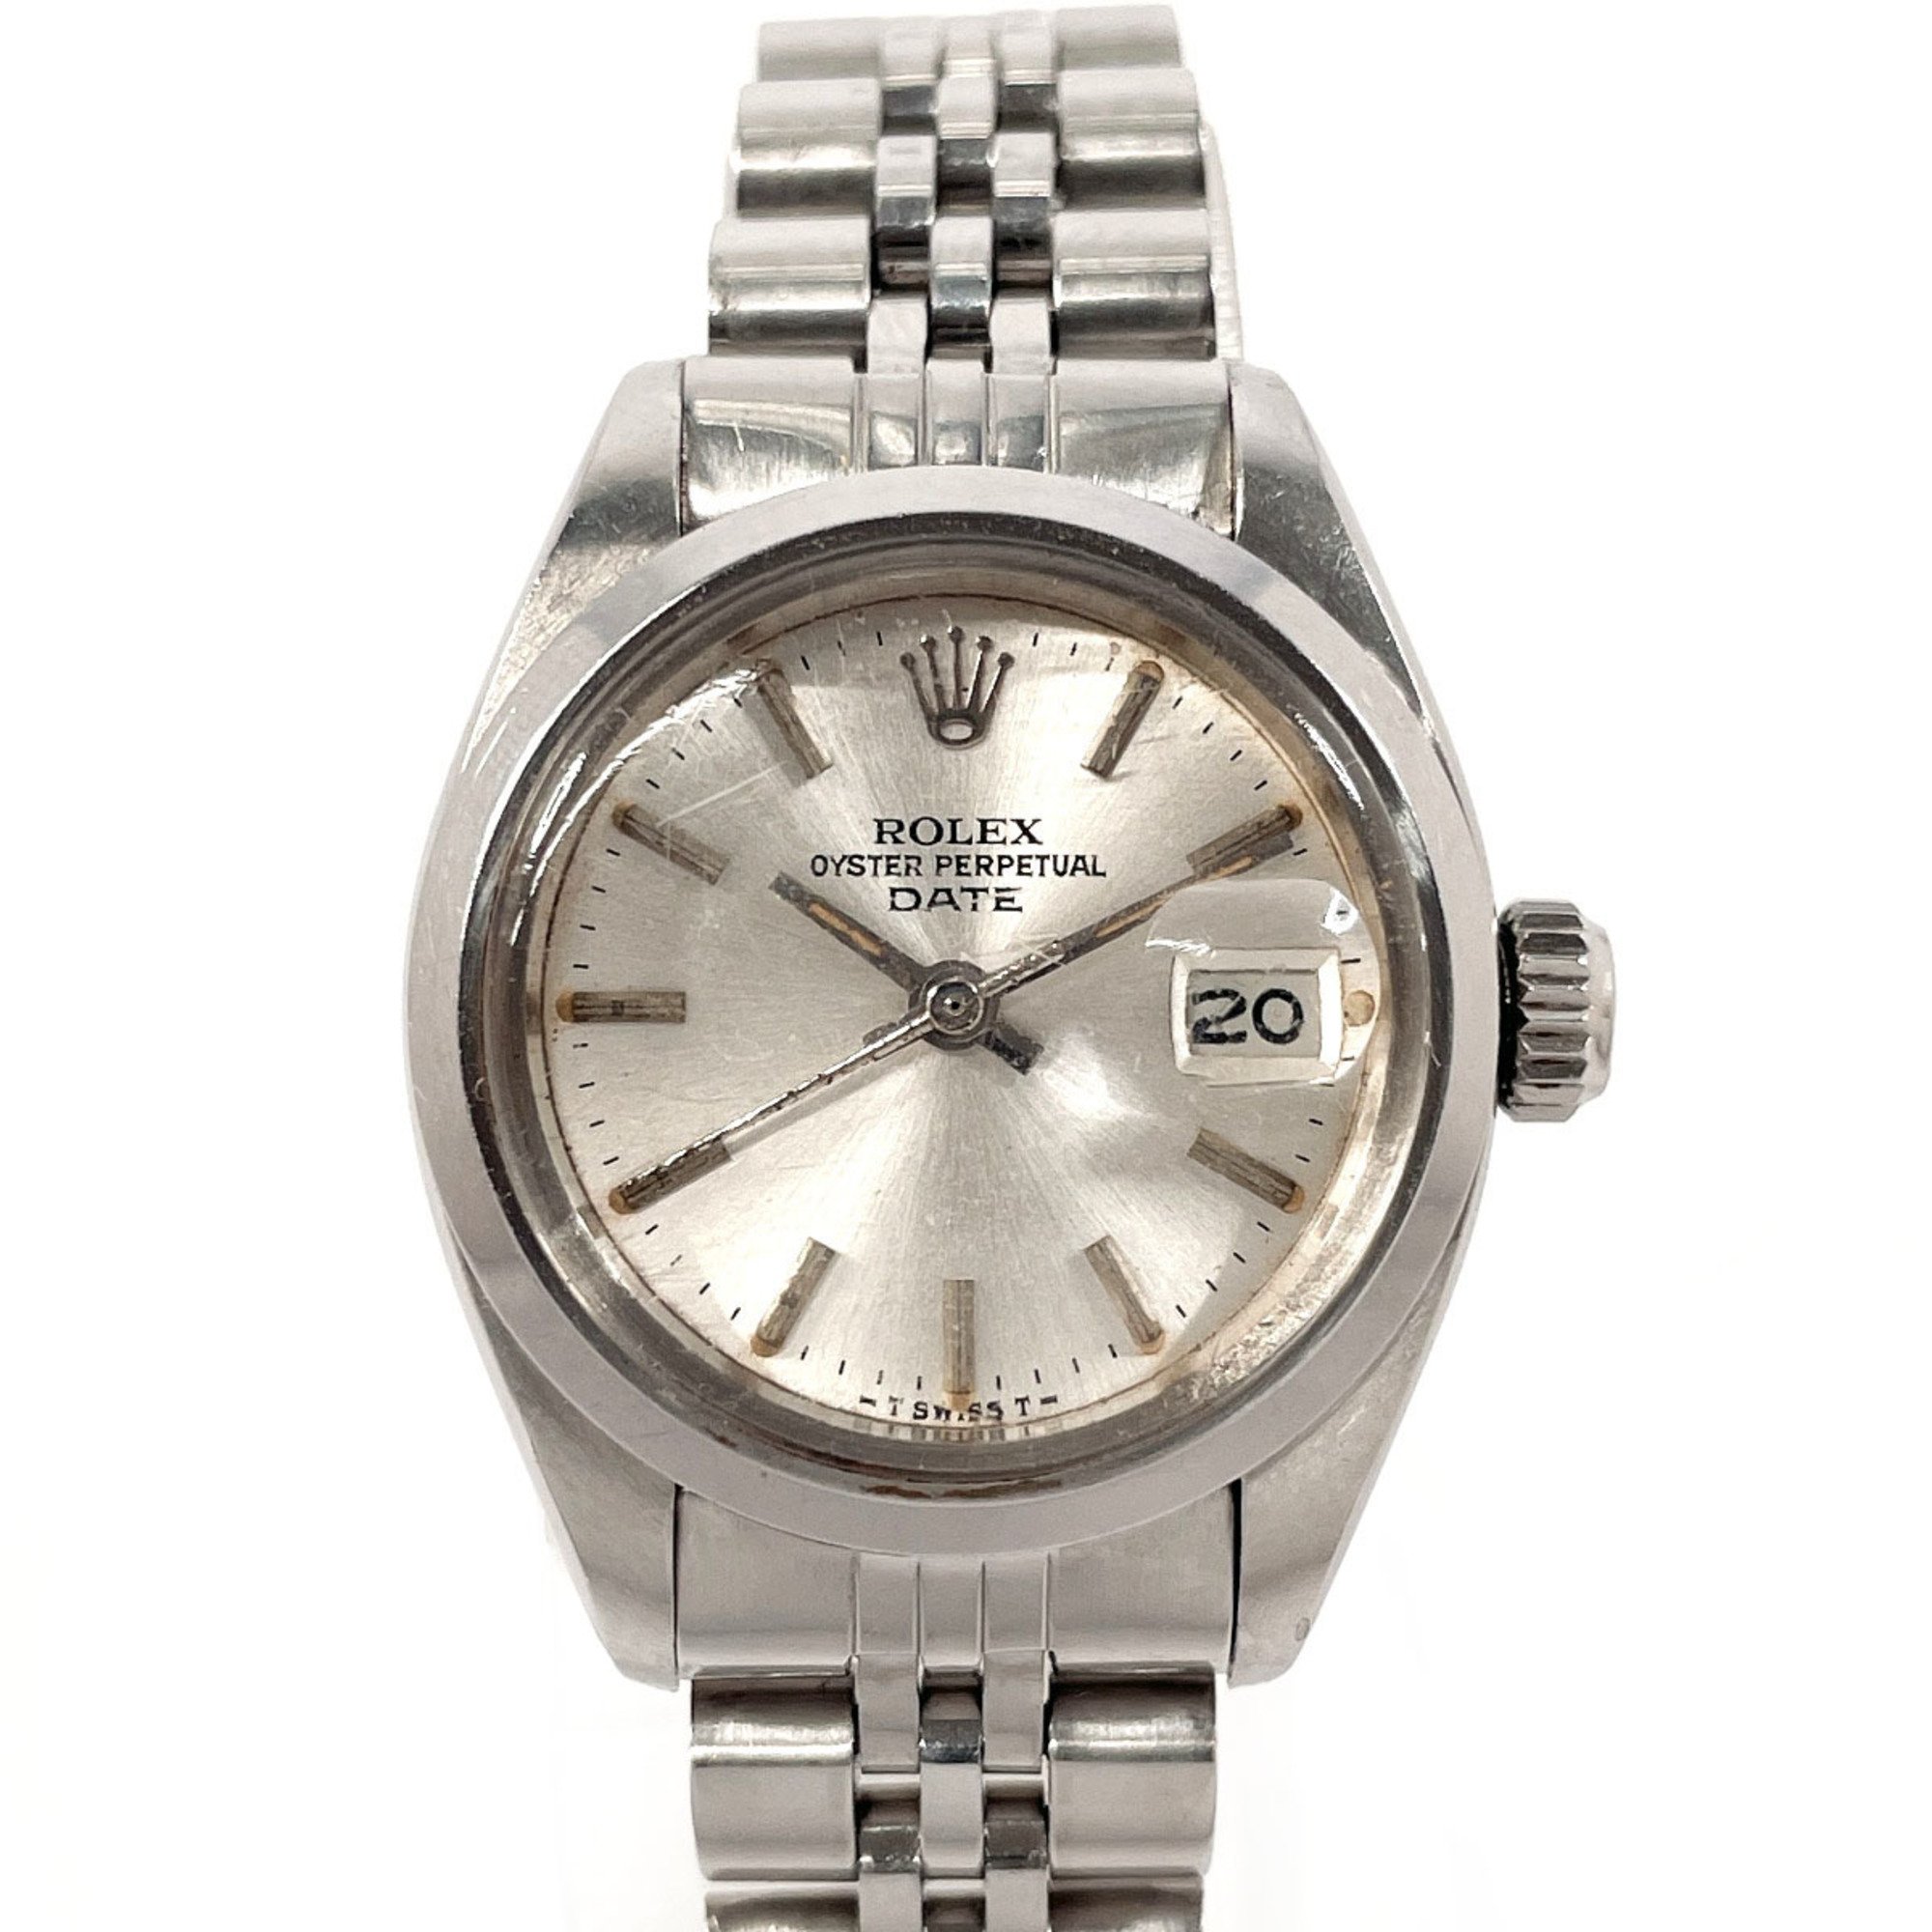 ROLEX Rolex Oyster Perpetual Date 6916 (case back 6900) Wristwatch Stainless Steel/Stainless Steel Silver Automatic Dial Ladies